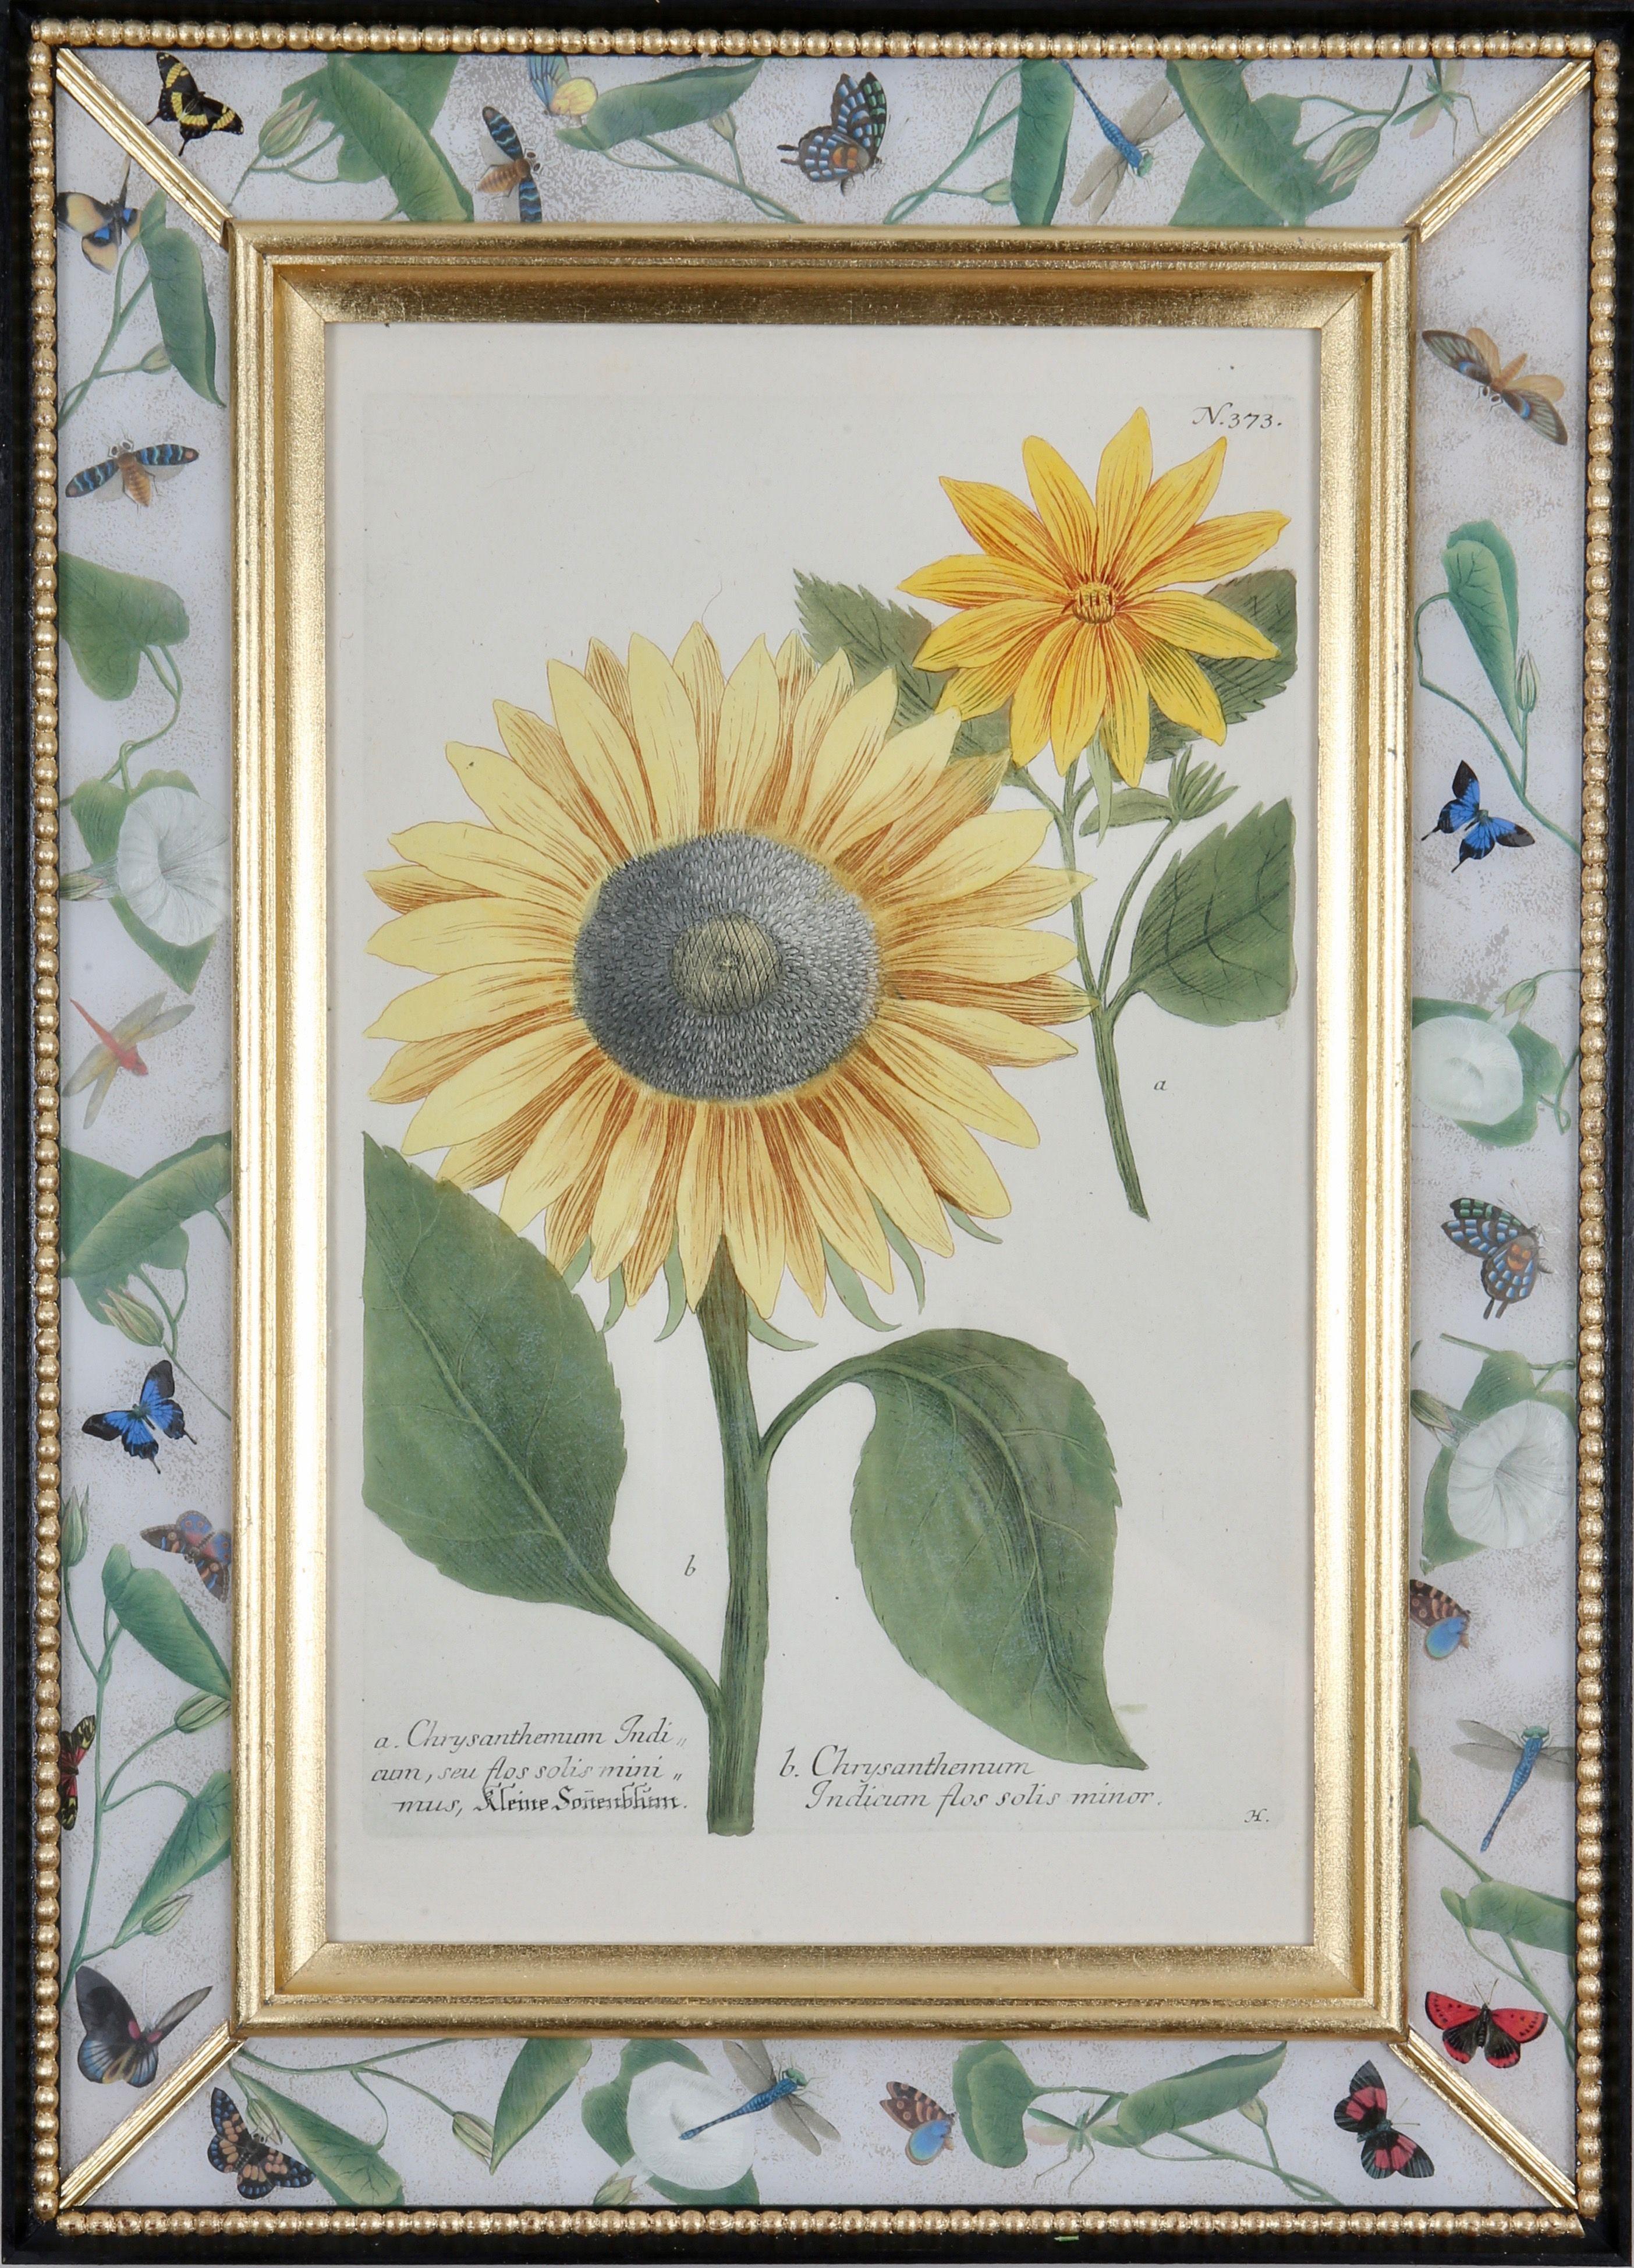 A complete set of four hand-coloured mezzotint engravings of sunflowers from: 